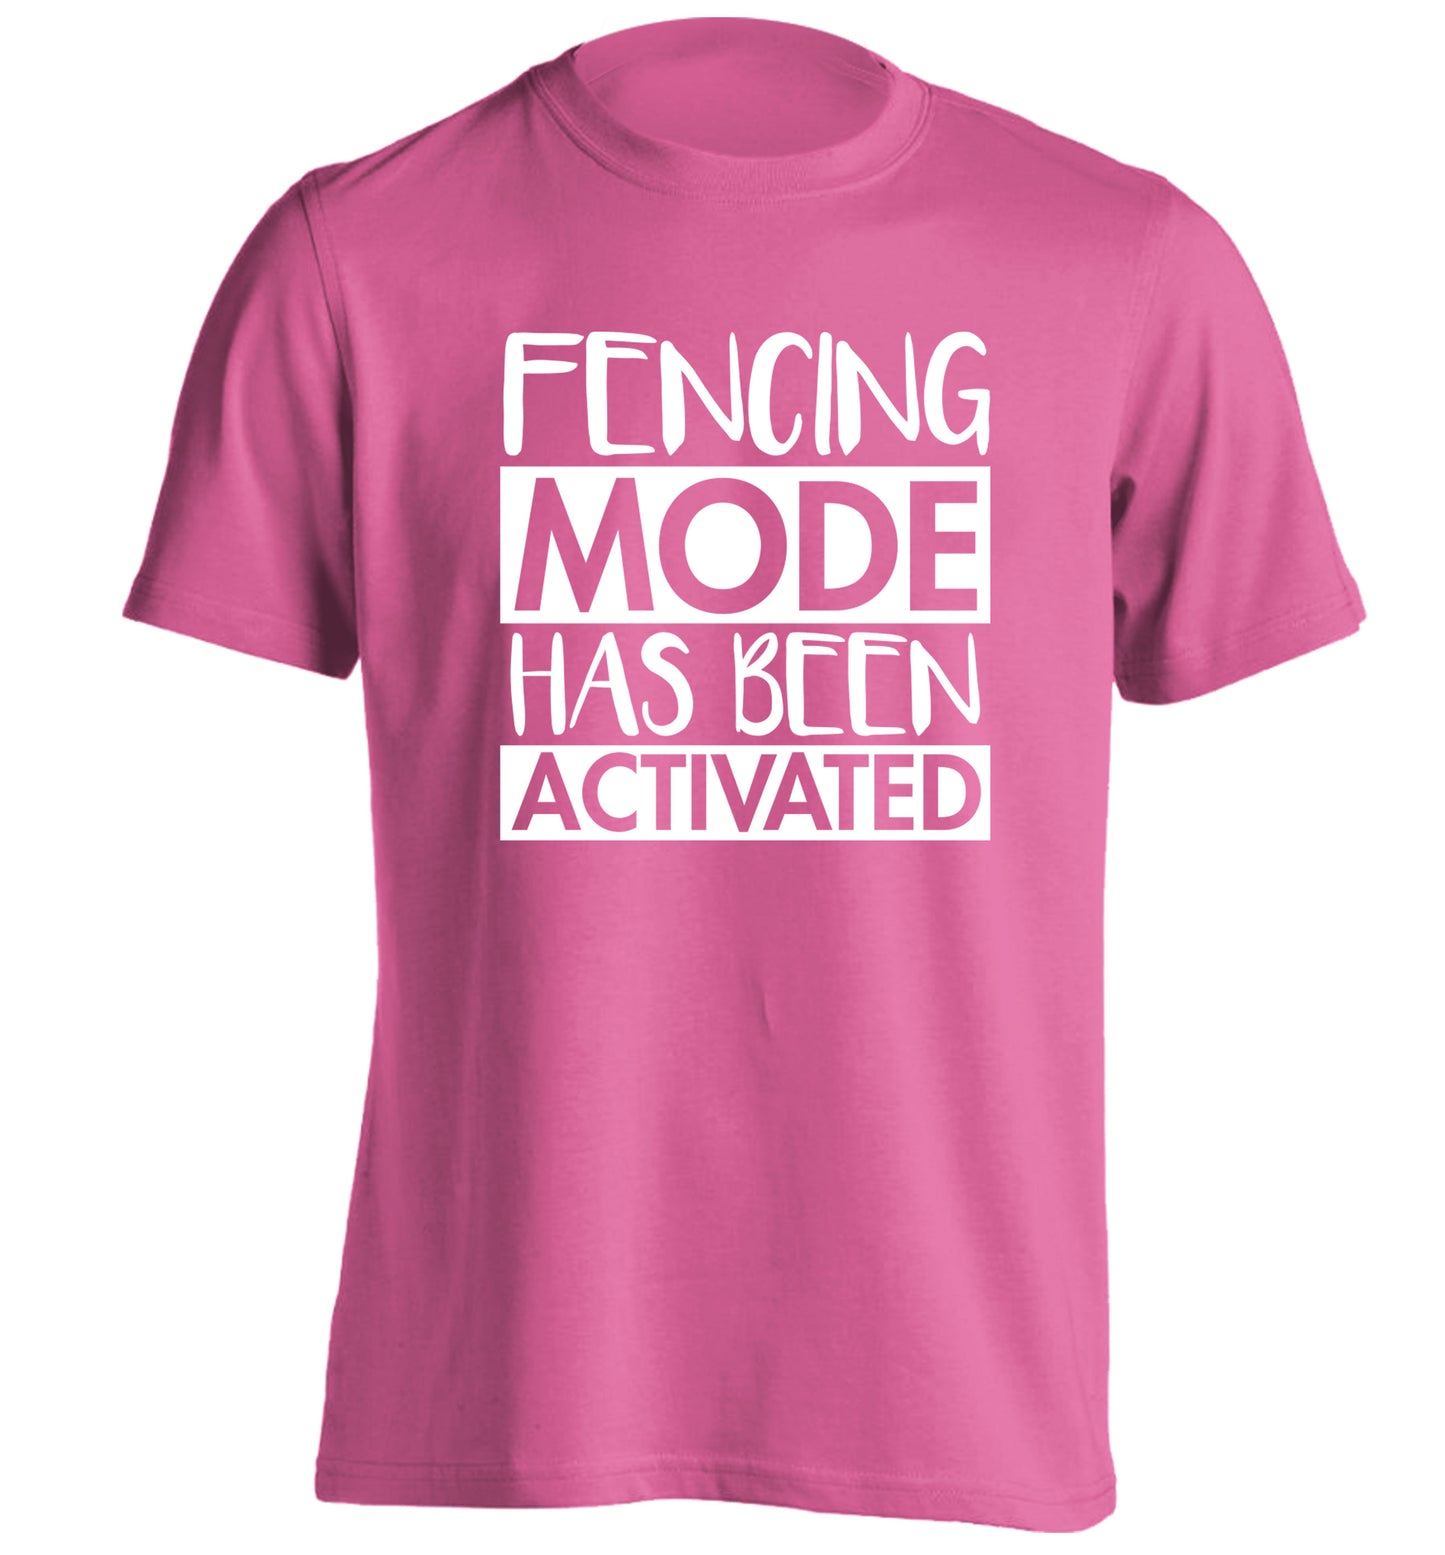 Fencing mode activated adults unisex pink Tshirt 2XL